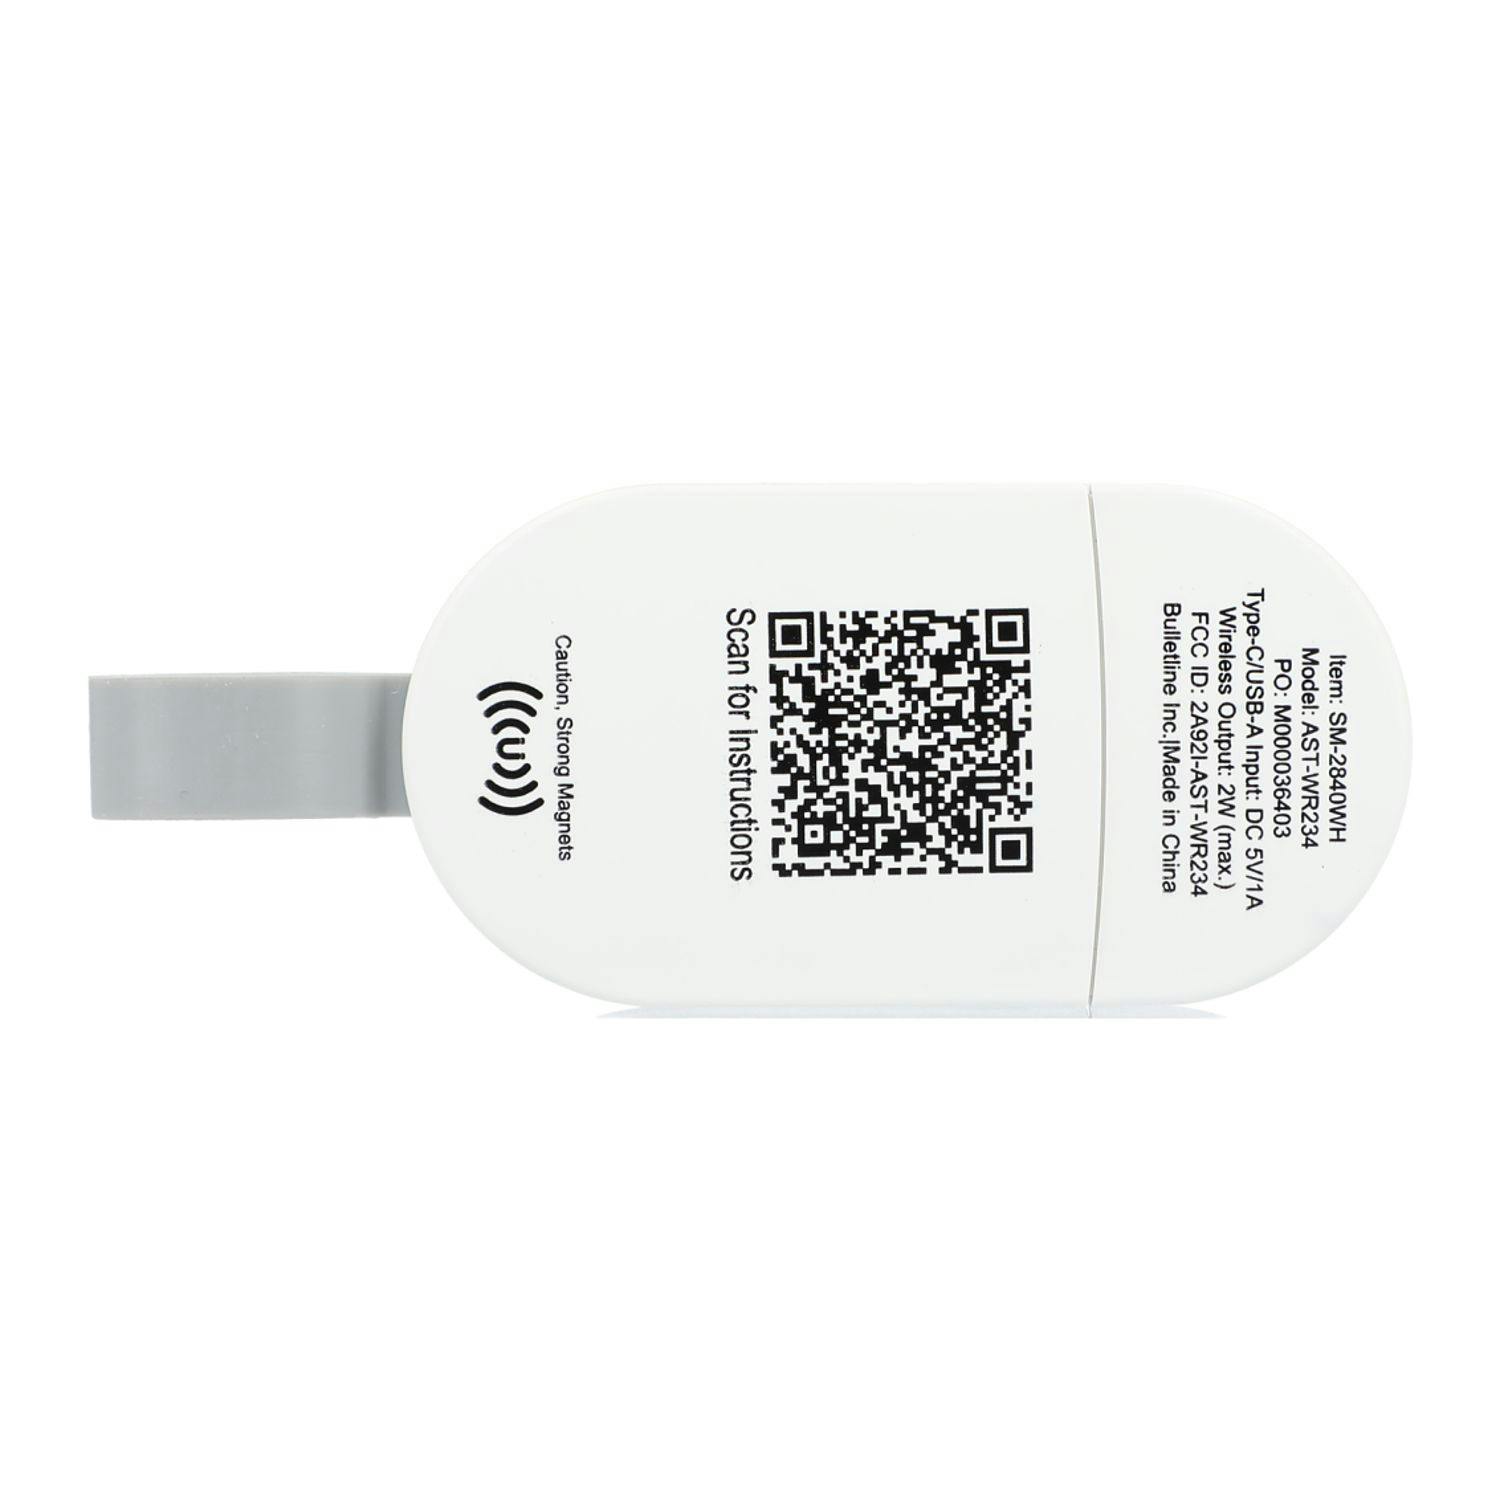 Redi iWatch USB Charger - additional Image 2